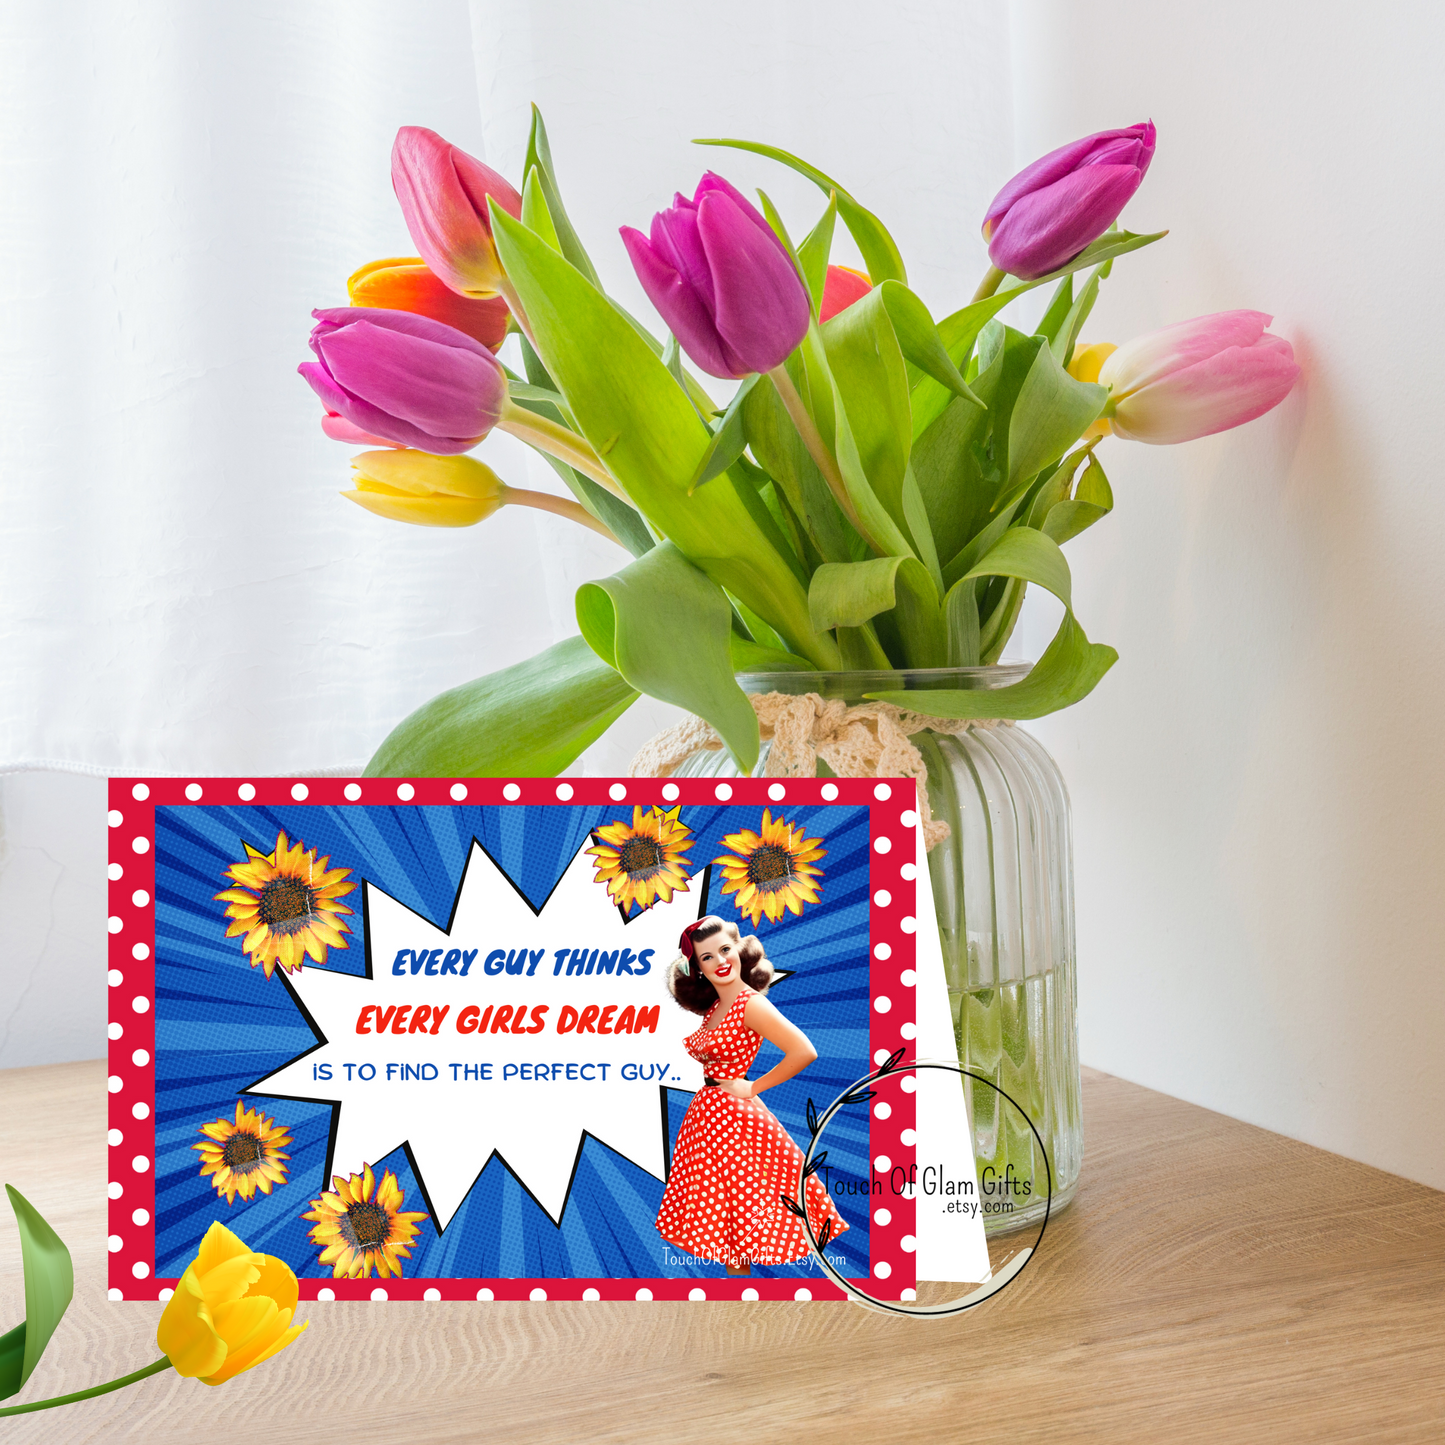 our vintage feel card for her is shown with a vase of tulips.